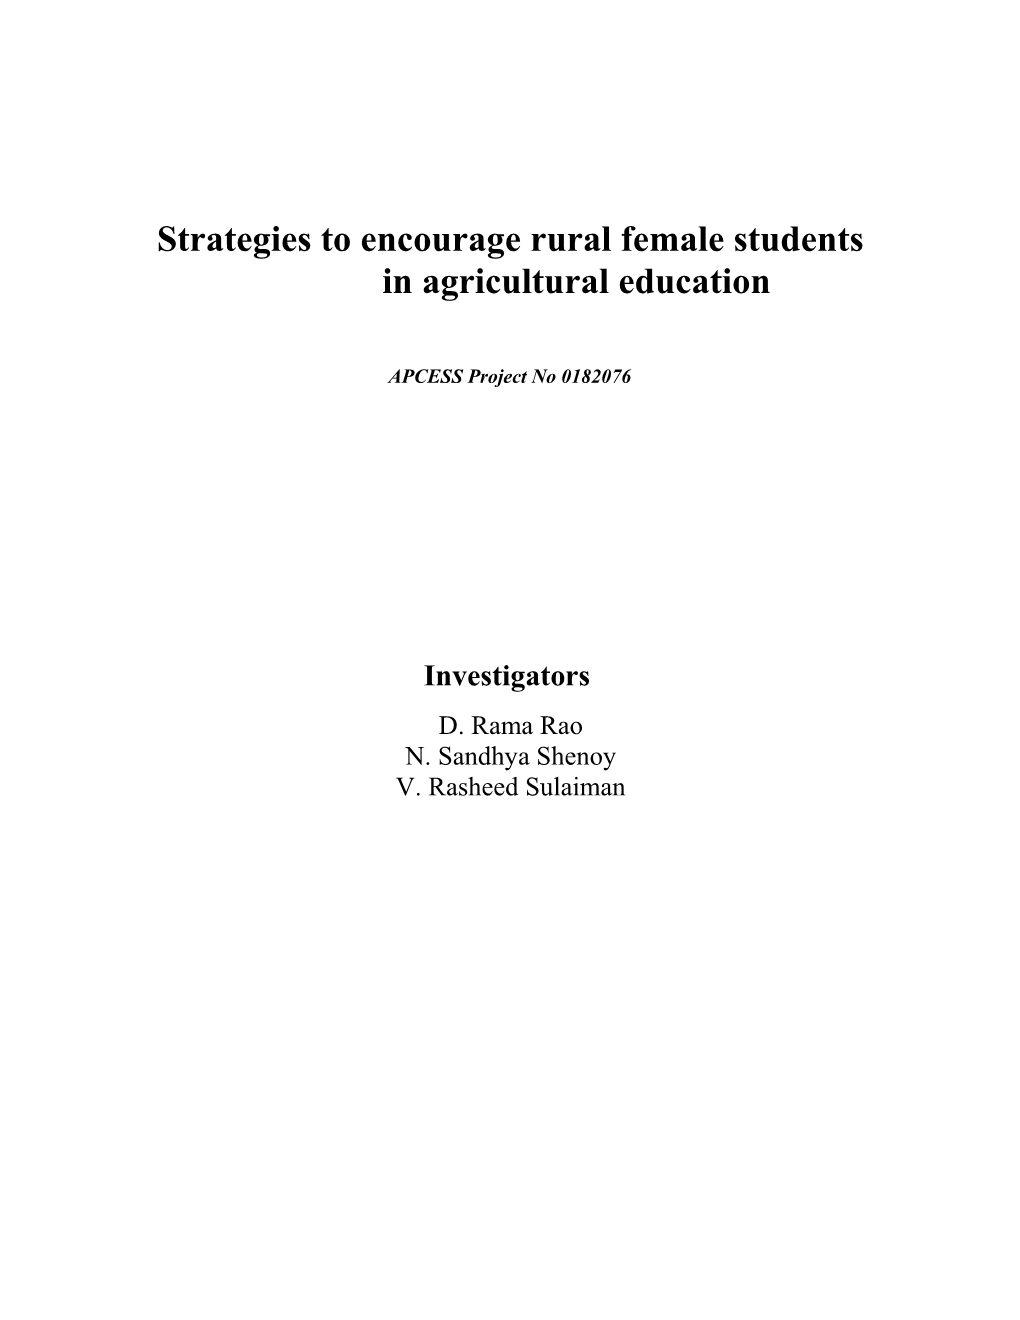 Strategies to Encourage Rural Female Students in the Agriculture Education Agricultural